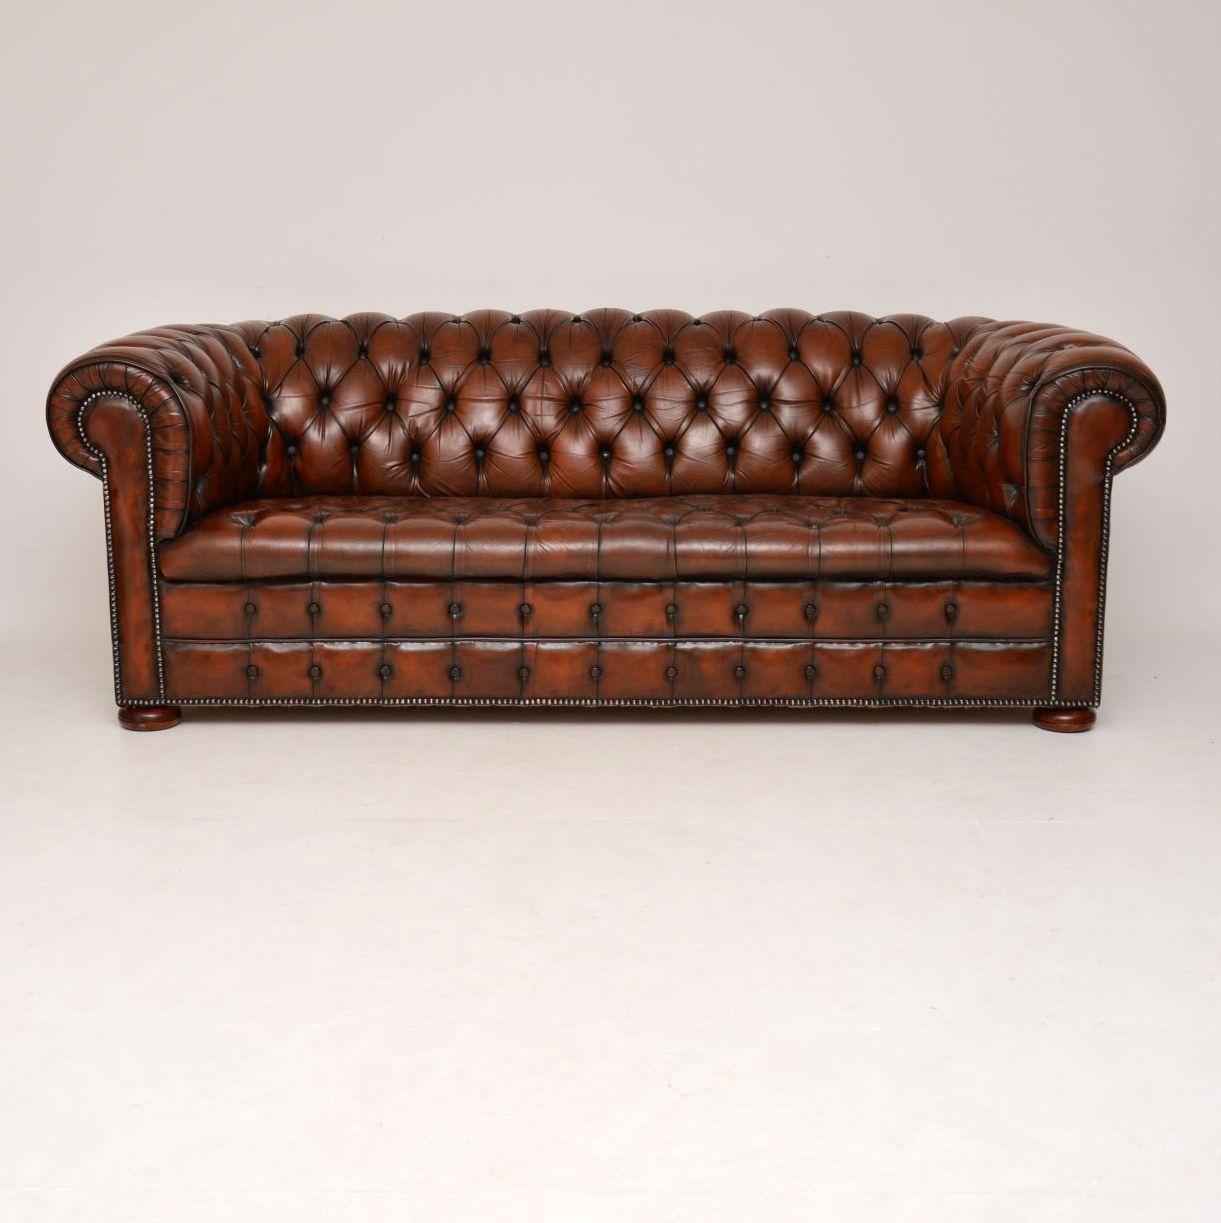 Antique three-seat Victorian style deep buttoned leather Chesterfield sofa dating from circa 1930s-1950s period sitting on flat bun feet. It’s in good original condition and has loads of character. The leather doesn’t have any tears or holes. There